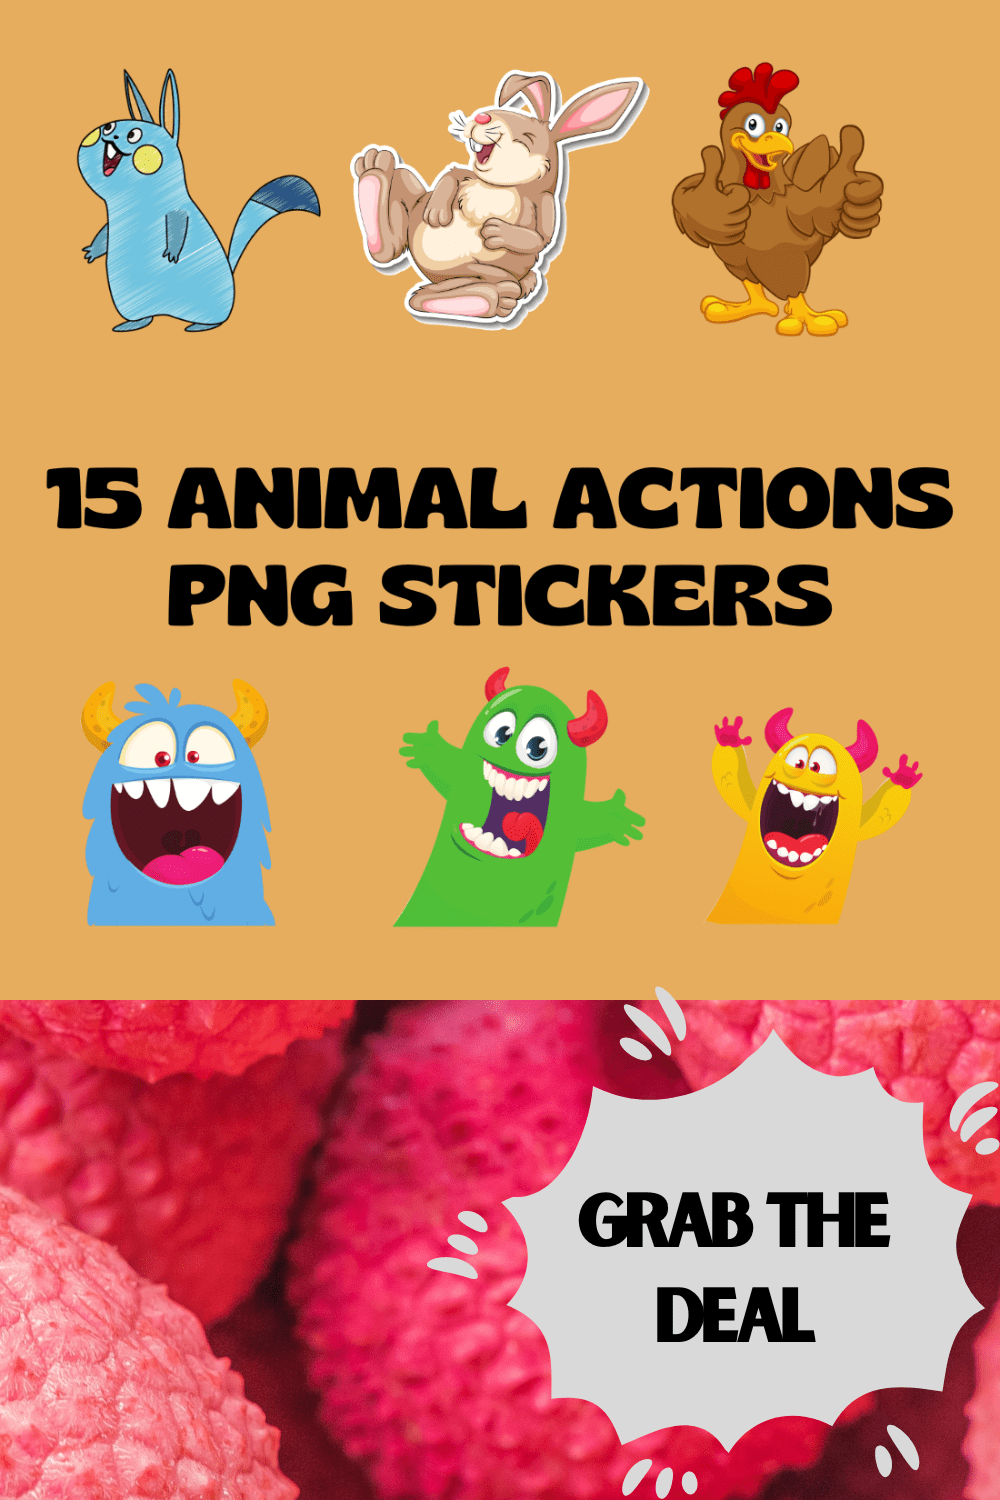 Funny Animal Actions PNG Graphic Stickers pinterest image.